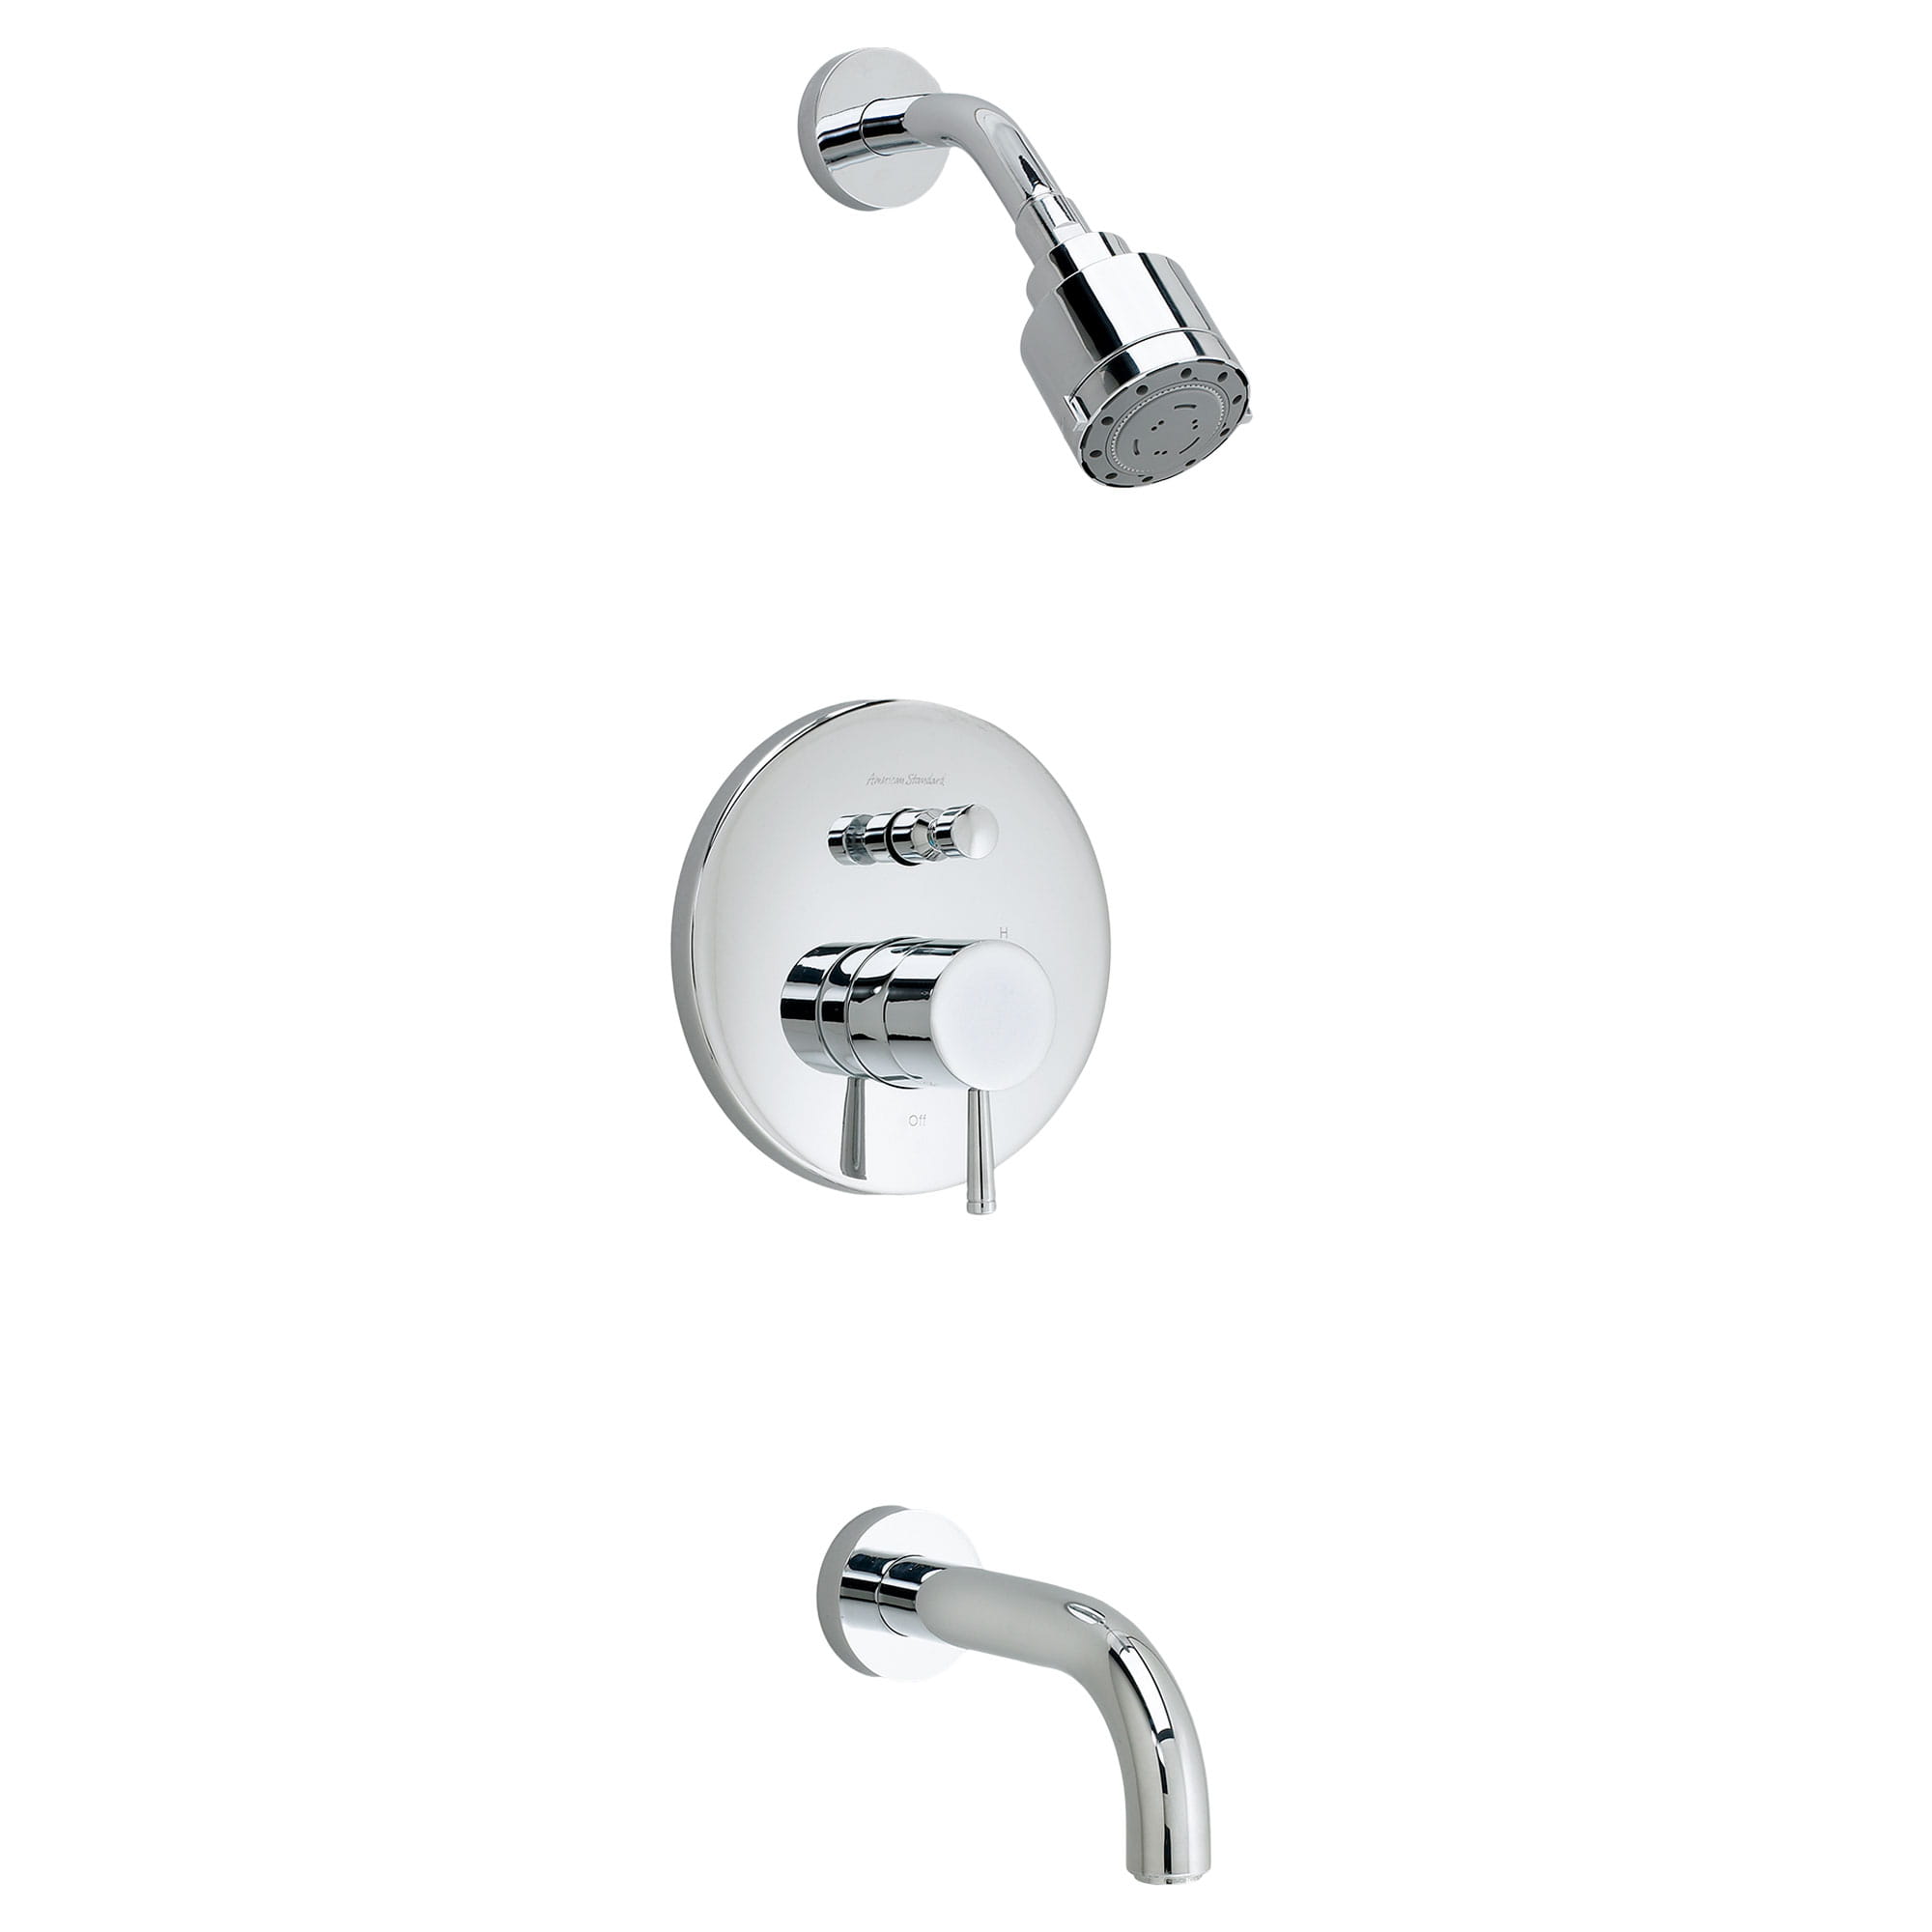 Serin 25 gpm 95 L min Tub and Shower Trim Kit With Rain Shower Head Double Ceramic Pressure Balance Cartridge With Lever Handle CHROME